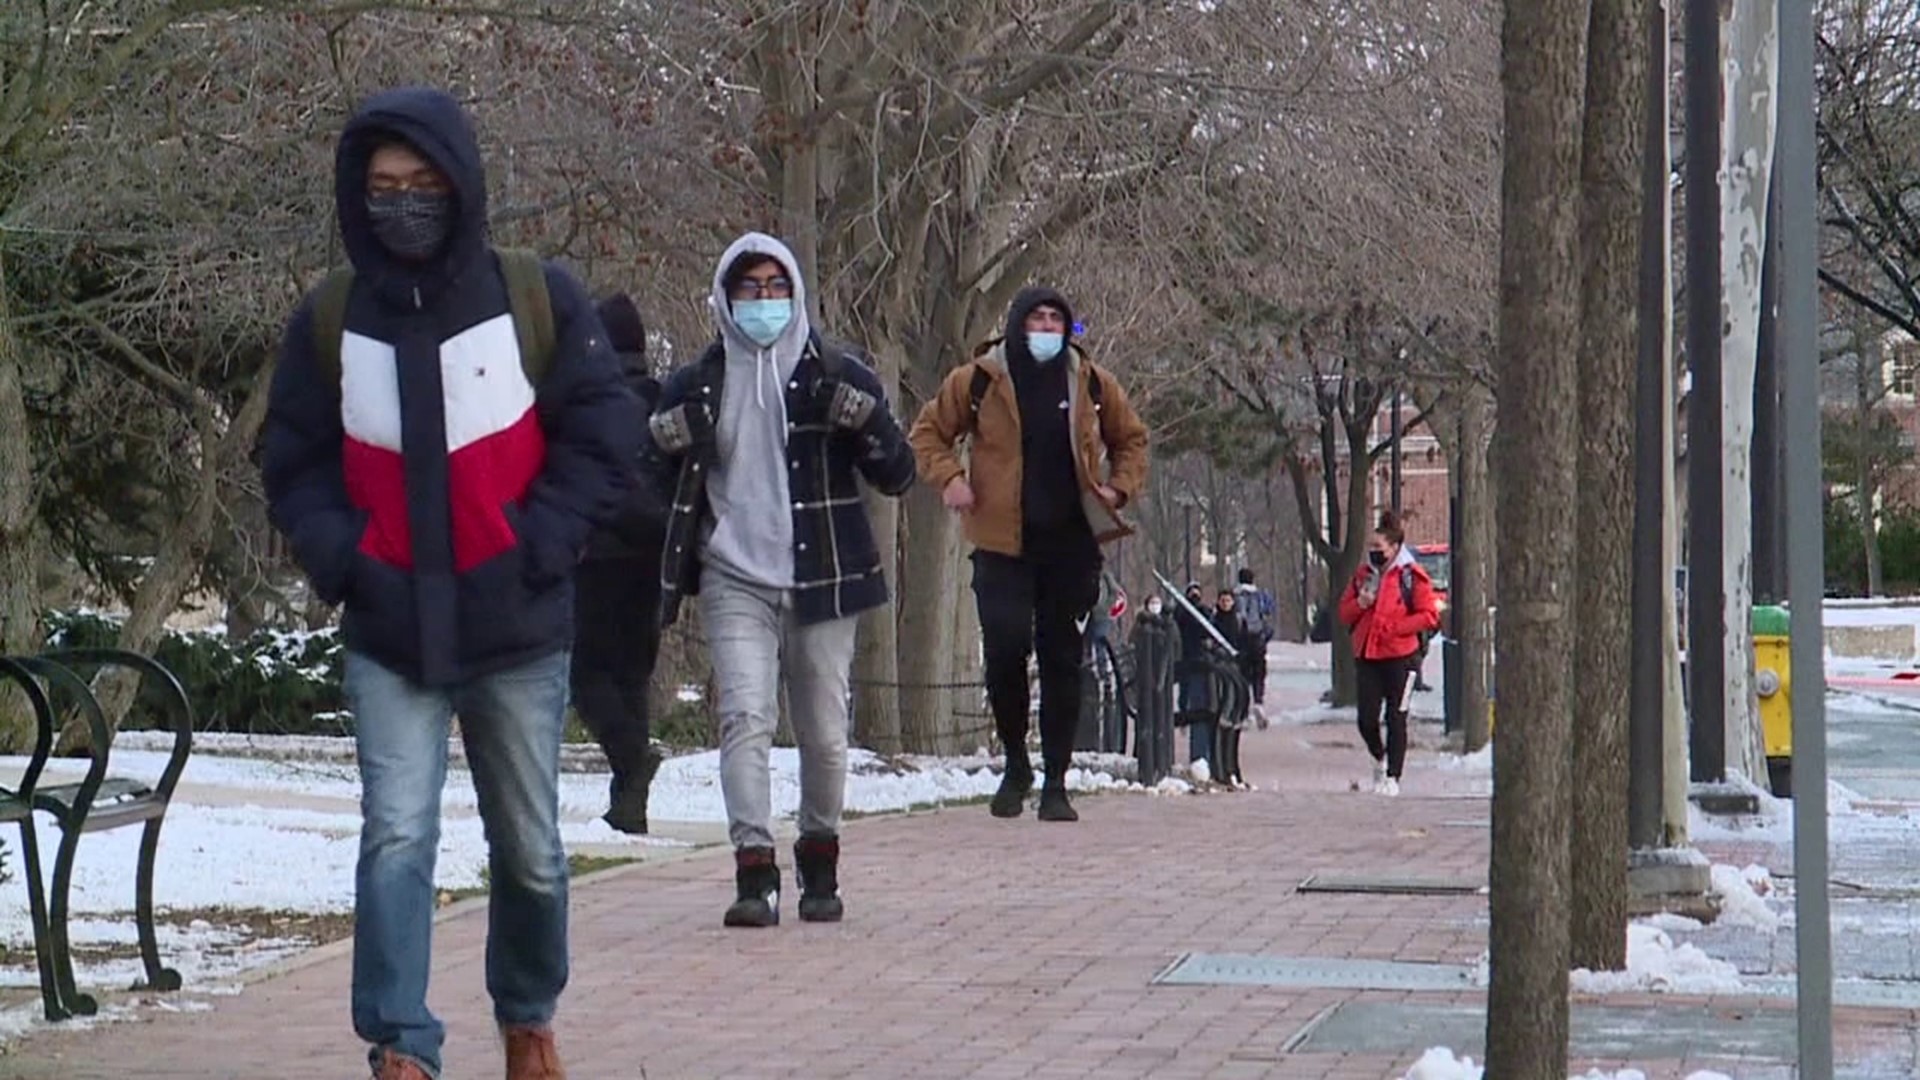 Students returned to campus for the start of spring semester despite a rise in COVID-19 cases.